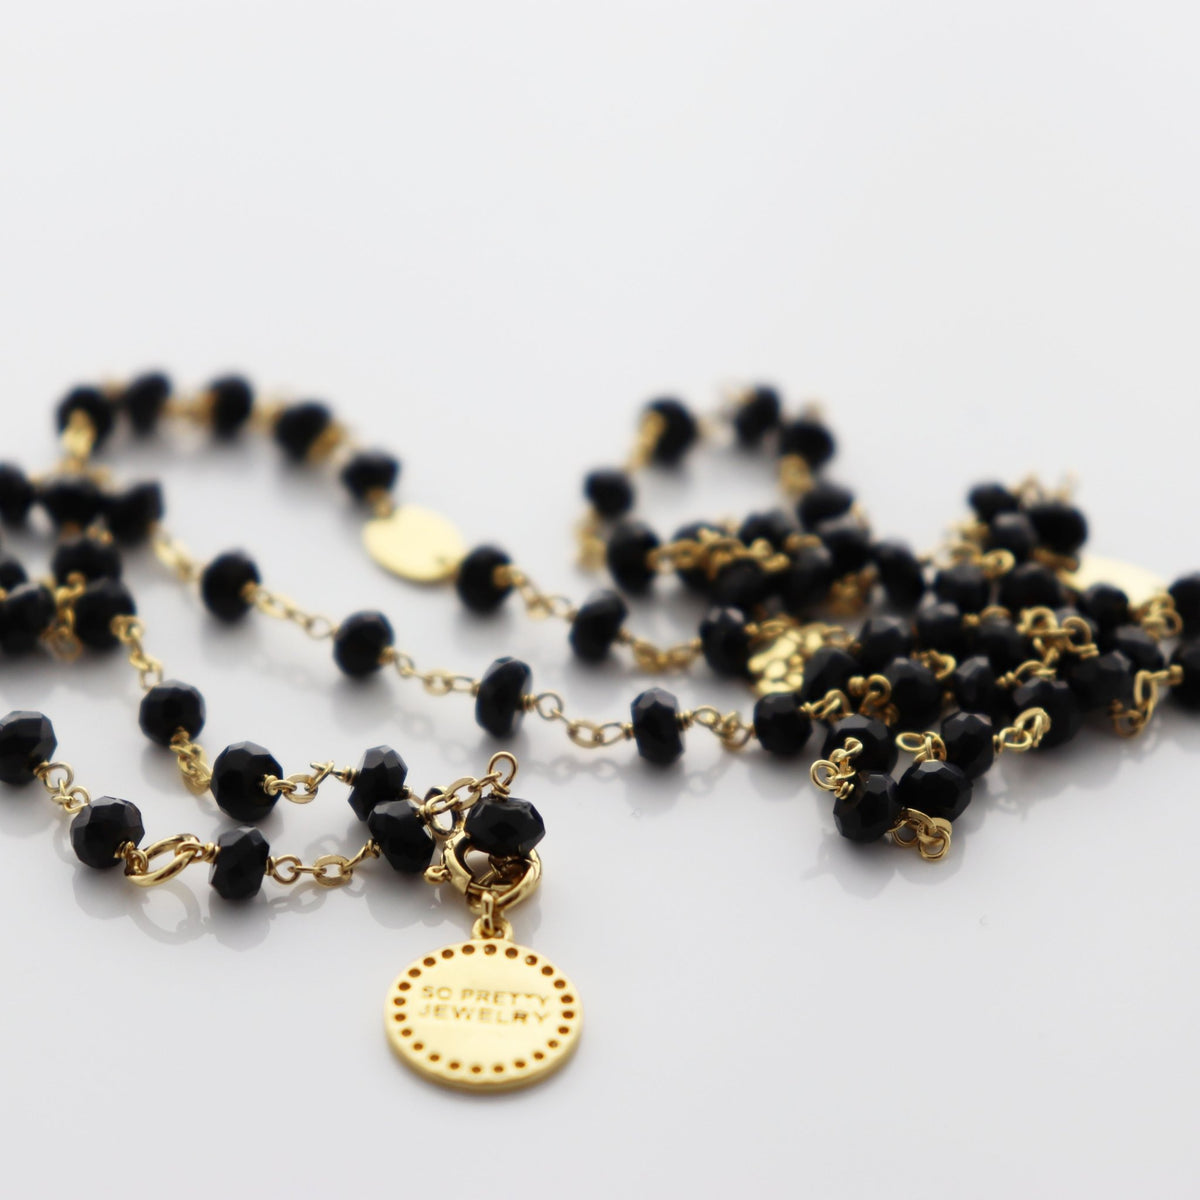 18 Inch Black Onyx Hydro Choker Necklace Faceted Rondelle Beads 24k Gold  Plated Wire Wrapped Rosary Vermeil Chain.